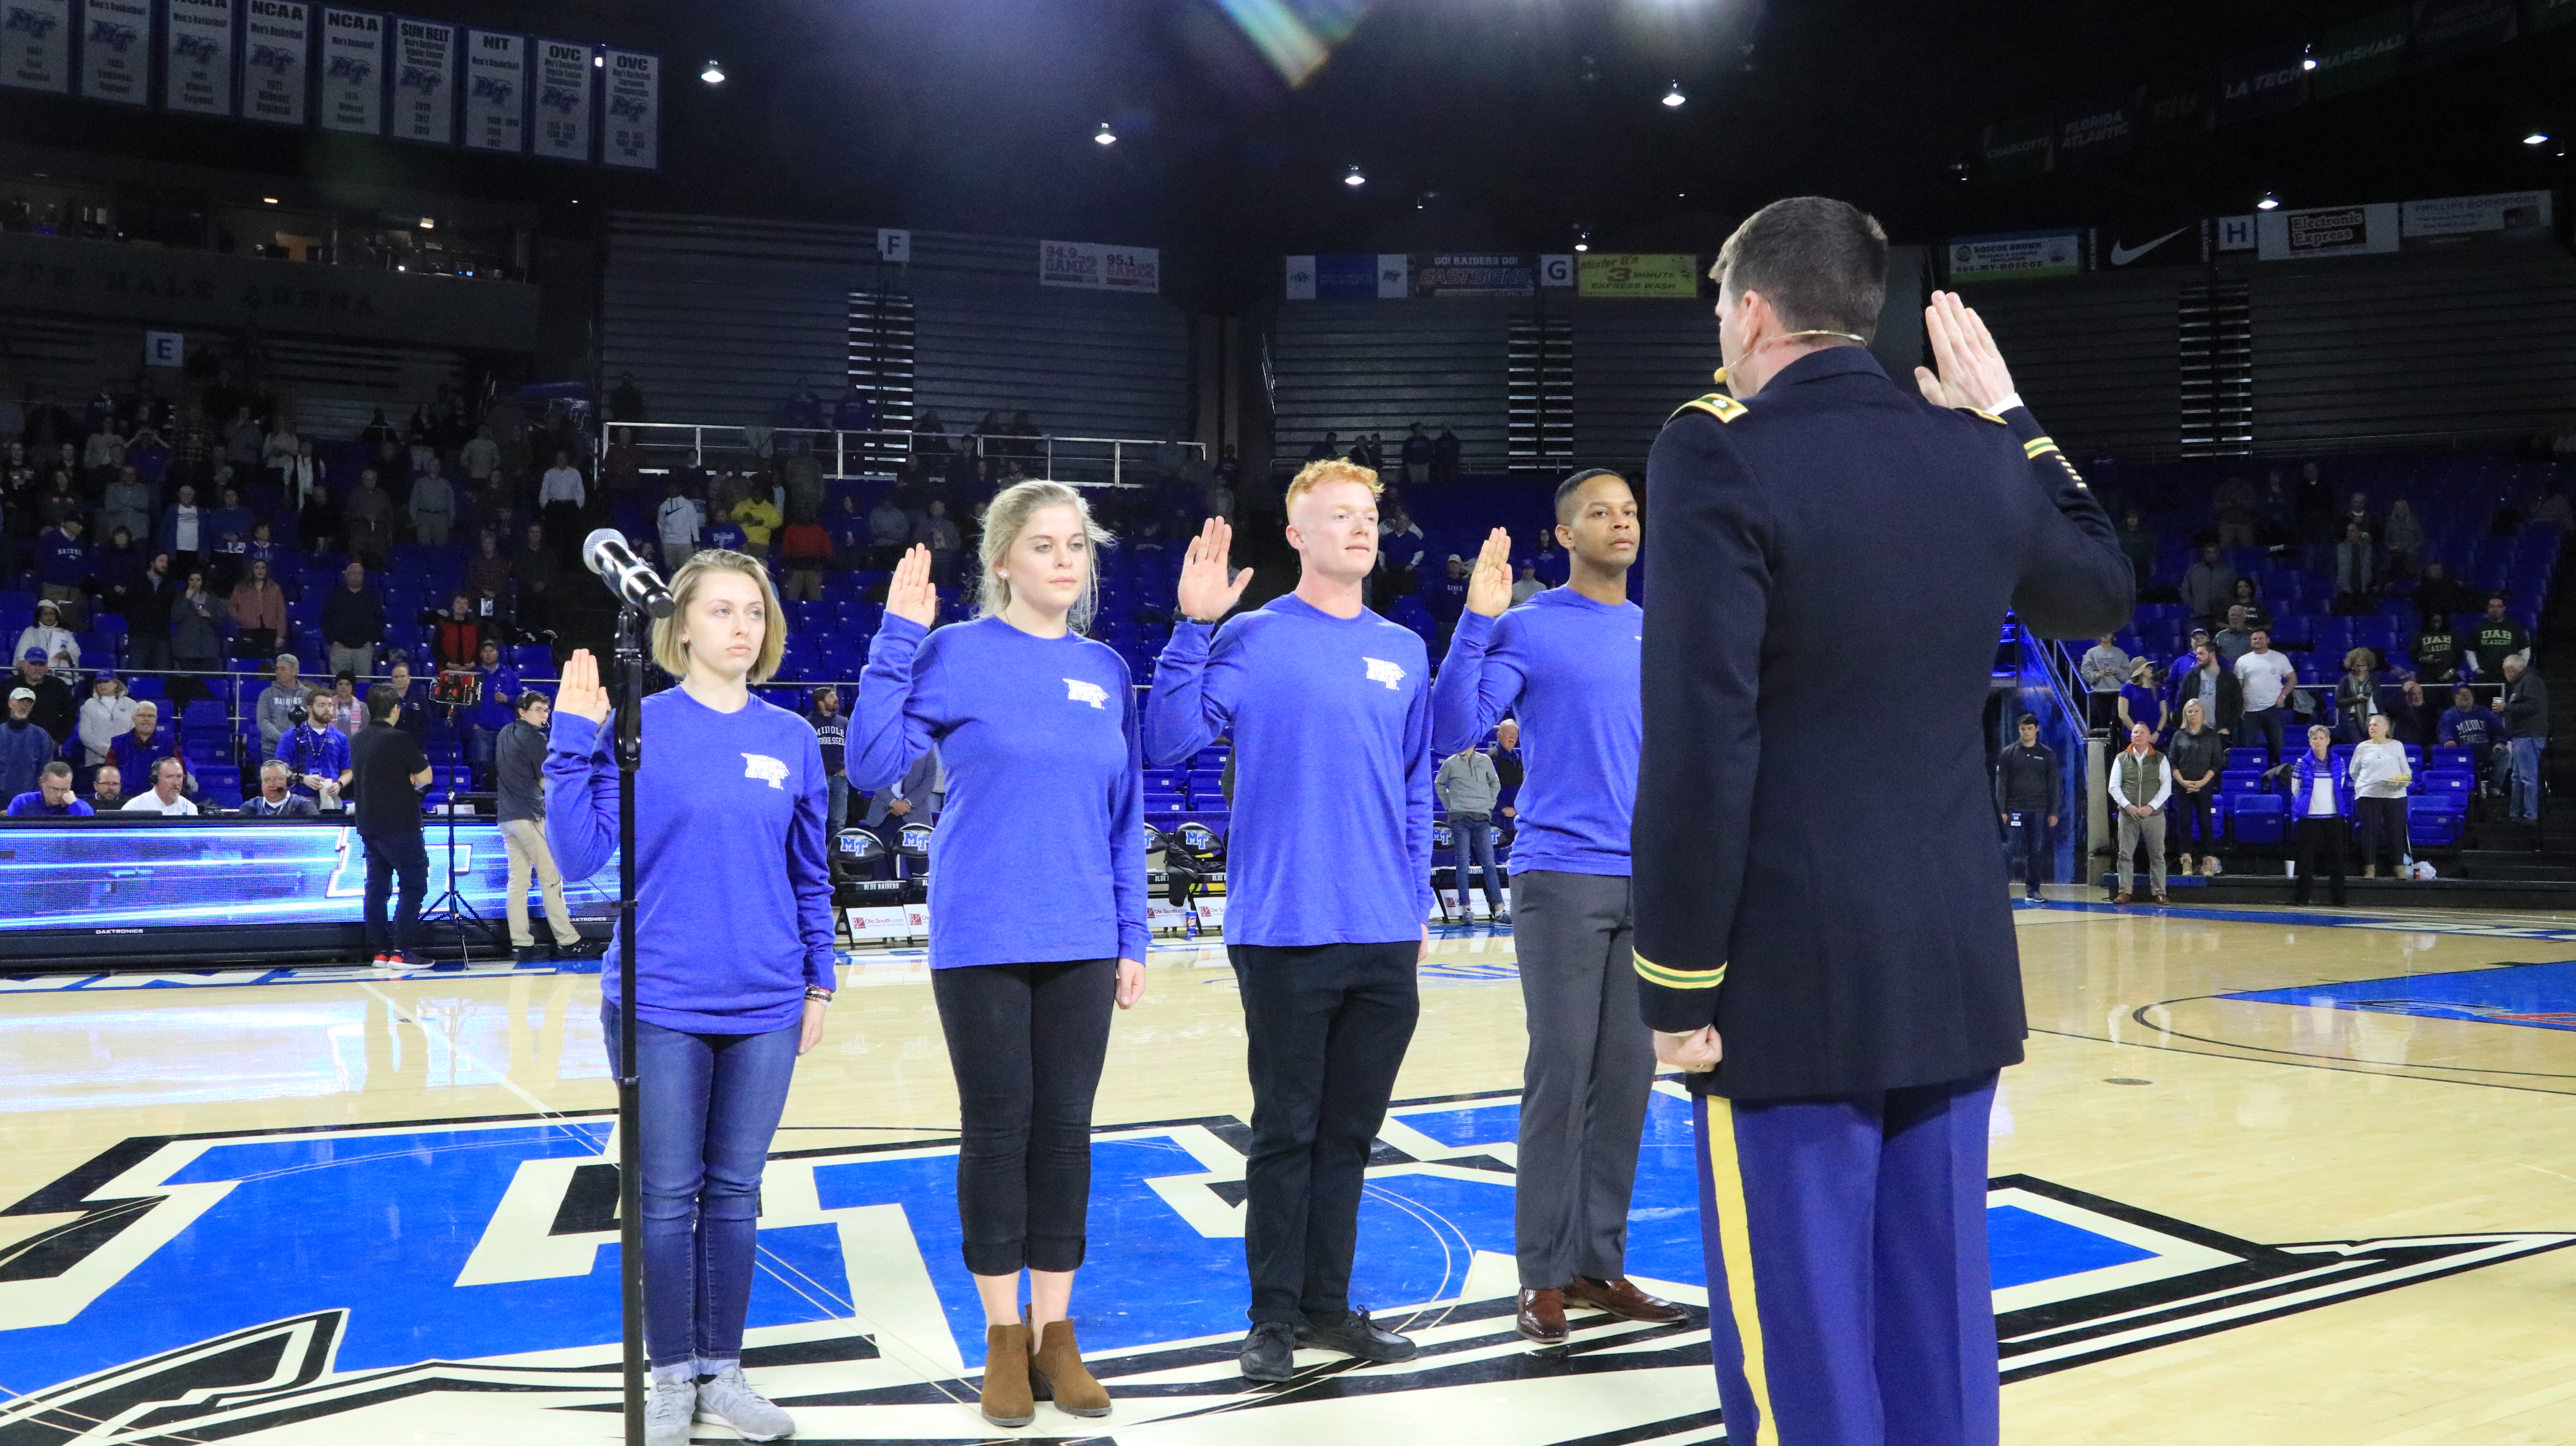 Four MTSU students raise their hands during the Oath of Enlistment ceremony while standing on the floor of the basketball court in Murphy Center.